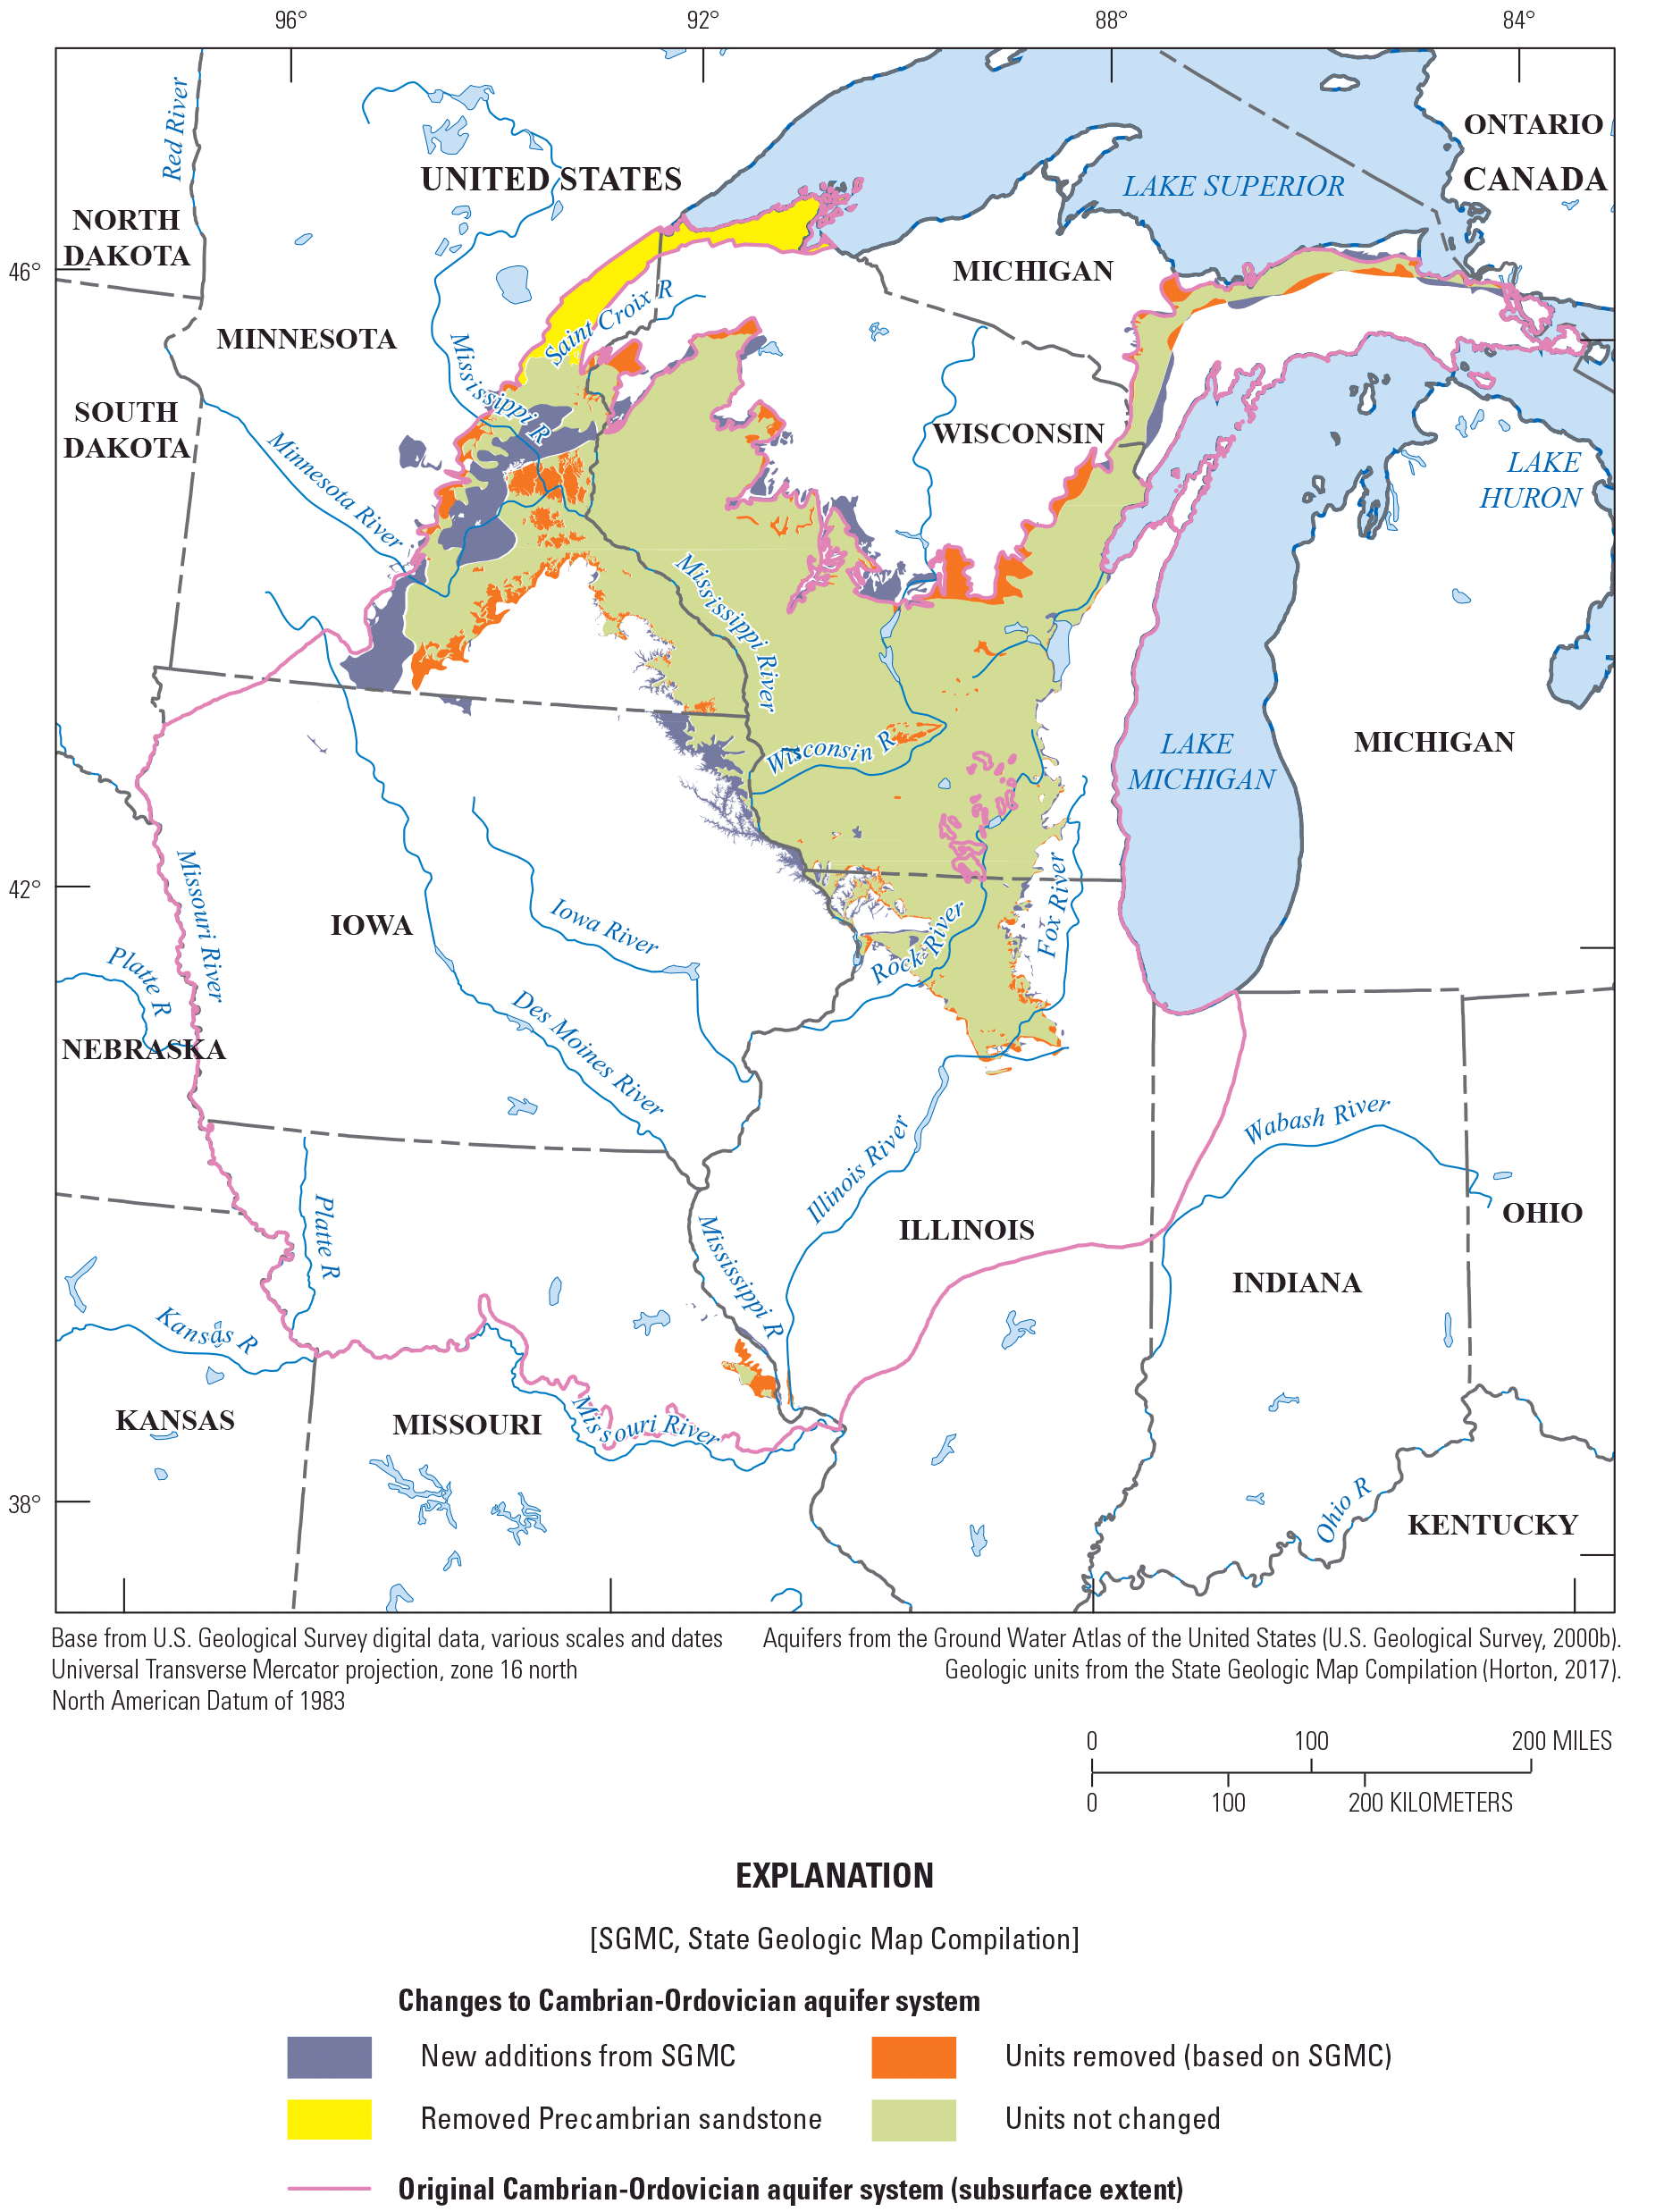 Increased level of spatial detail in the extent of the Cambrian-Ordovician aquifer
                        system, particularly the locations of units removed from and added to the boundary.